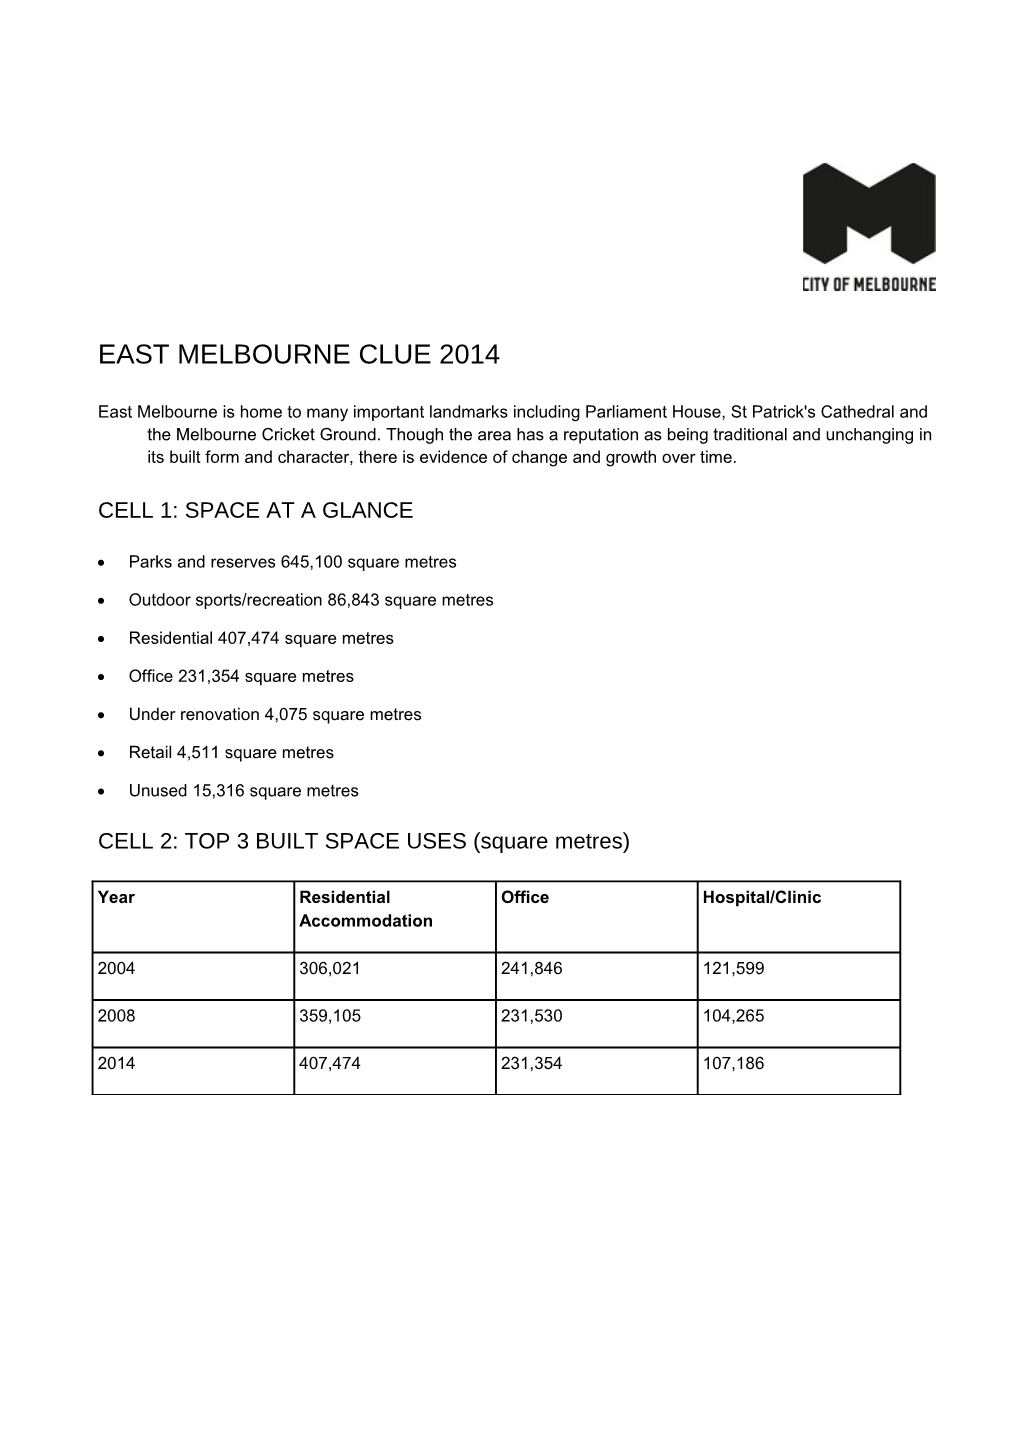 CLUE 2014 East Melbourne Infographic